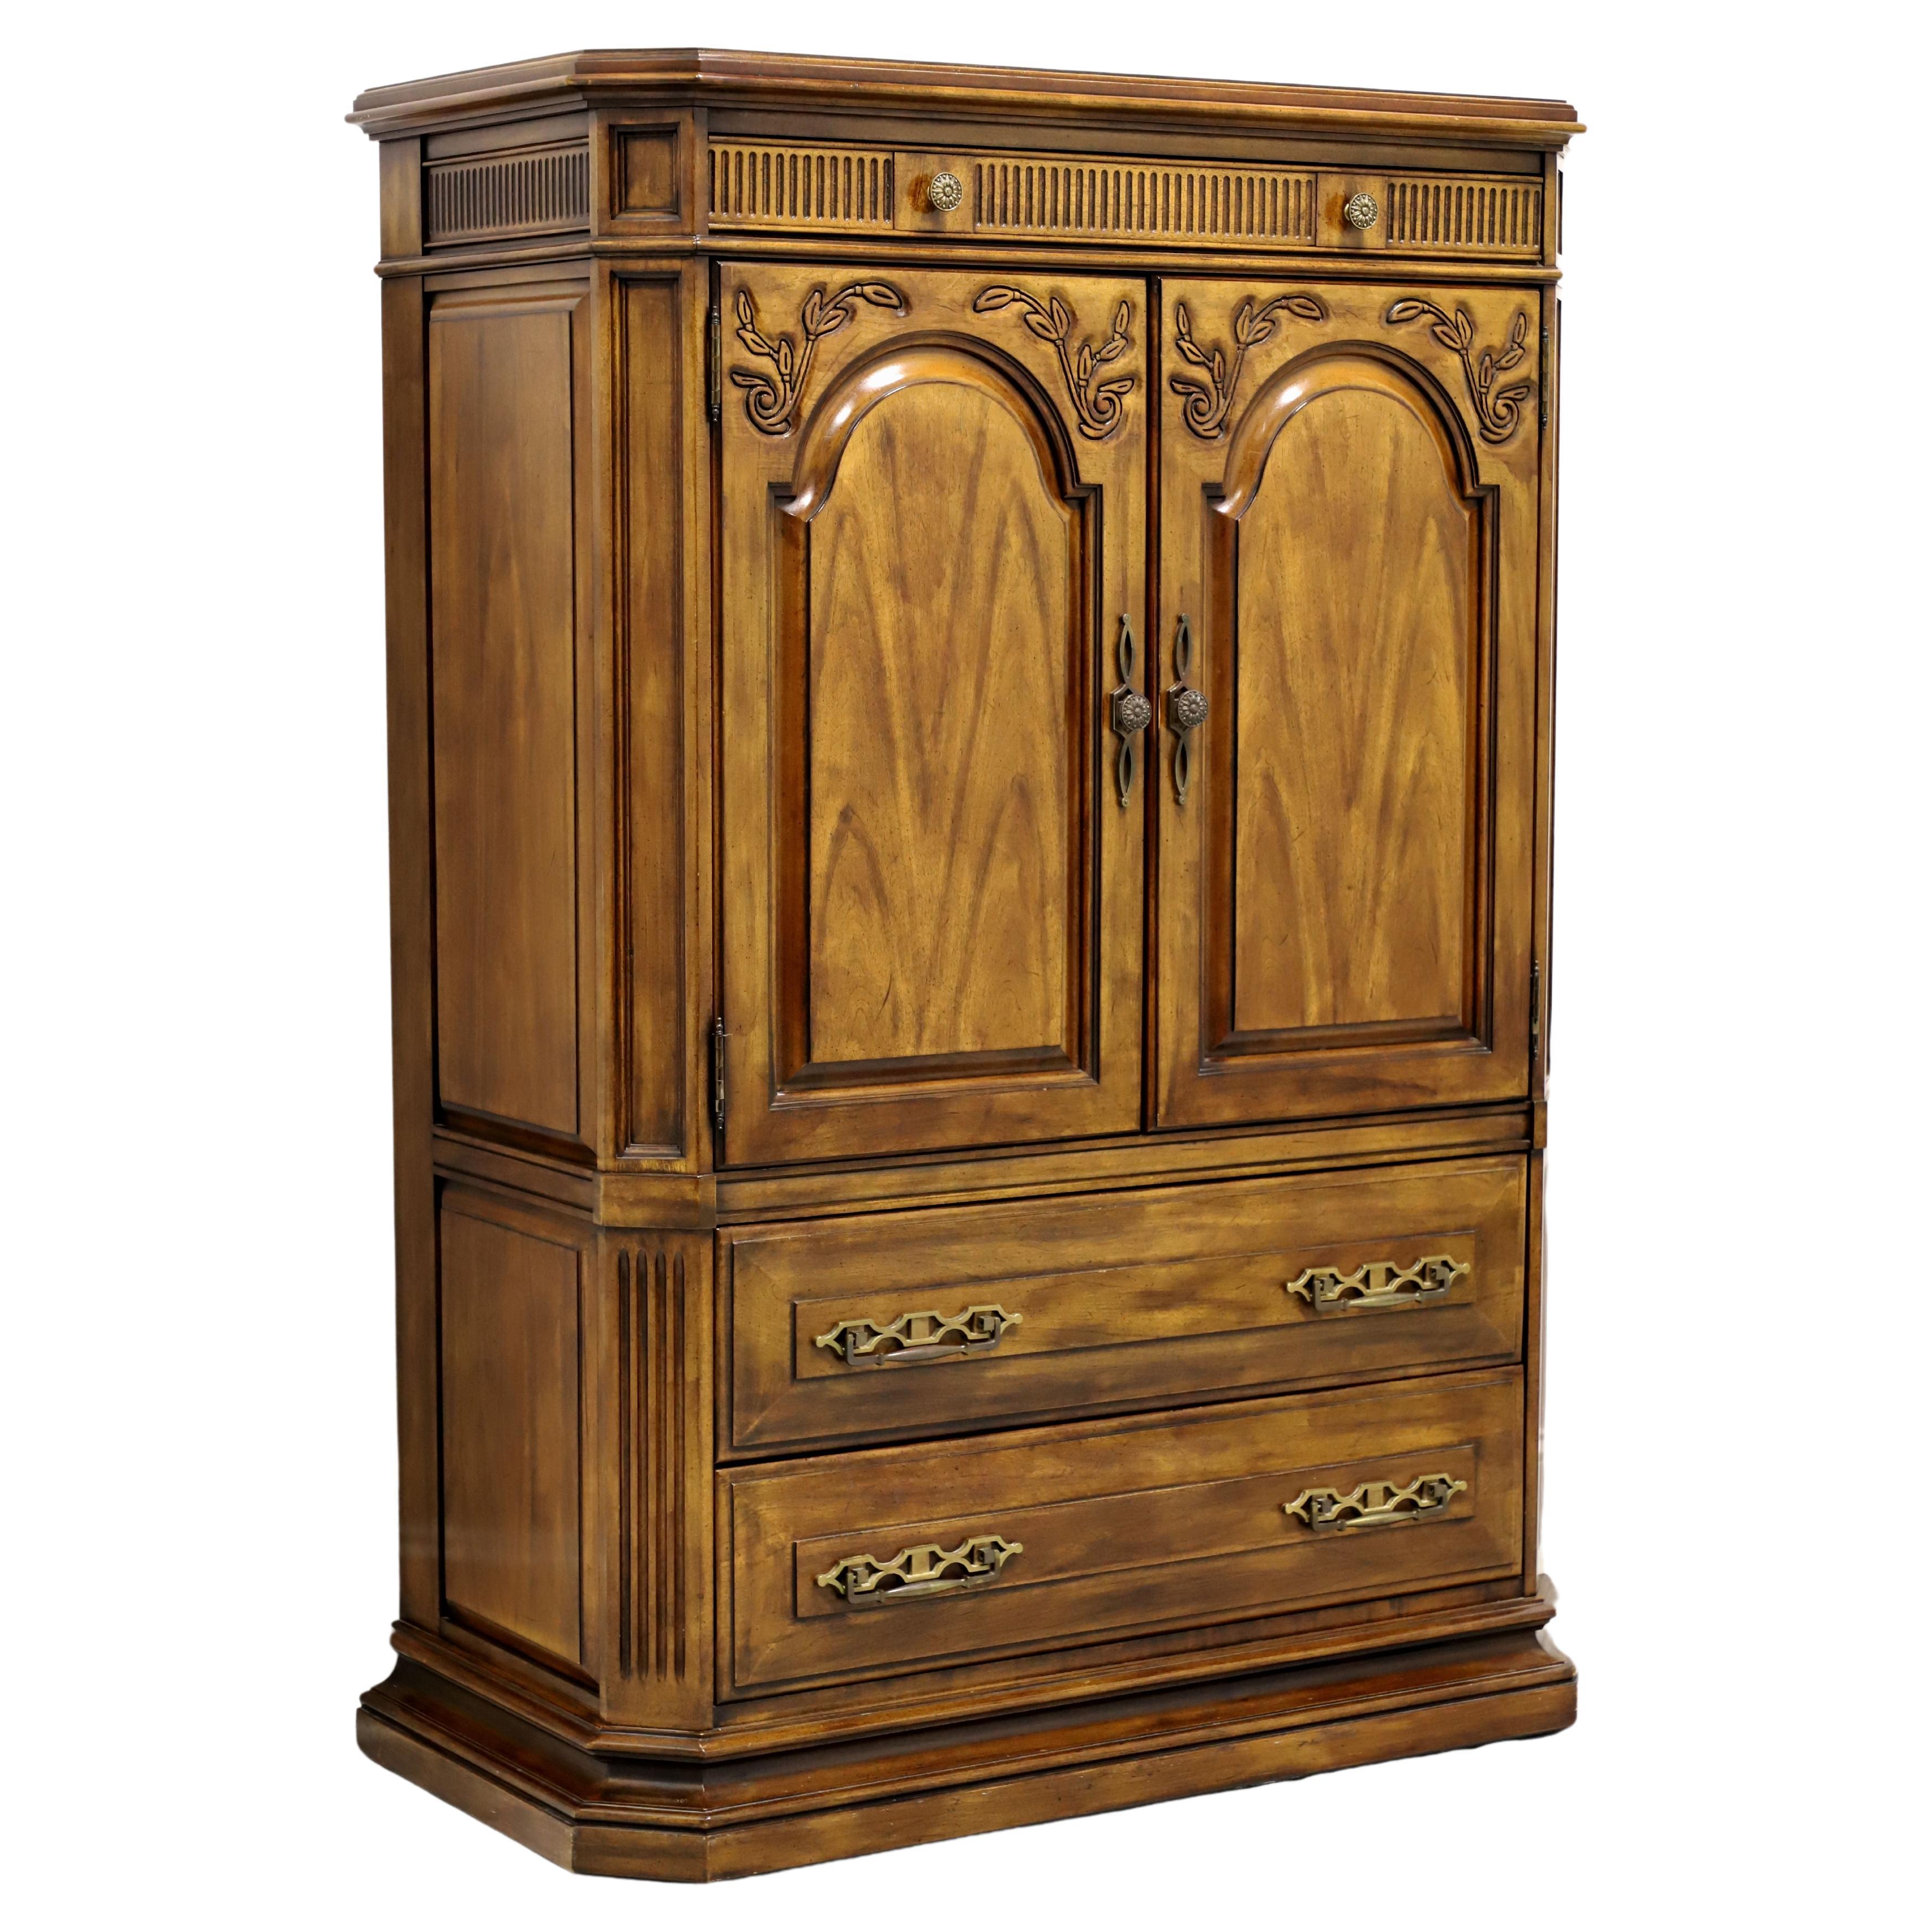 WHITE OF MEBANE Cherry French Country Style Gentleman's Chest For Sale